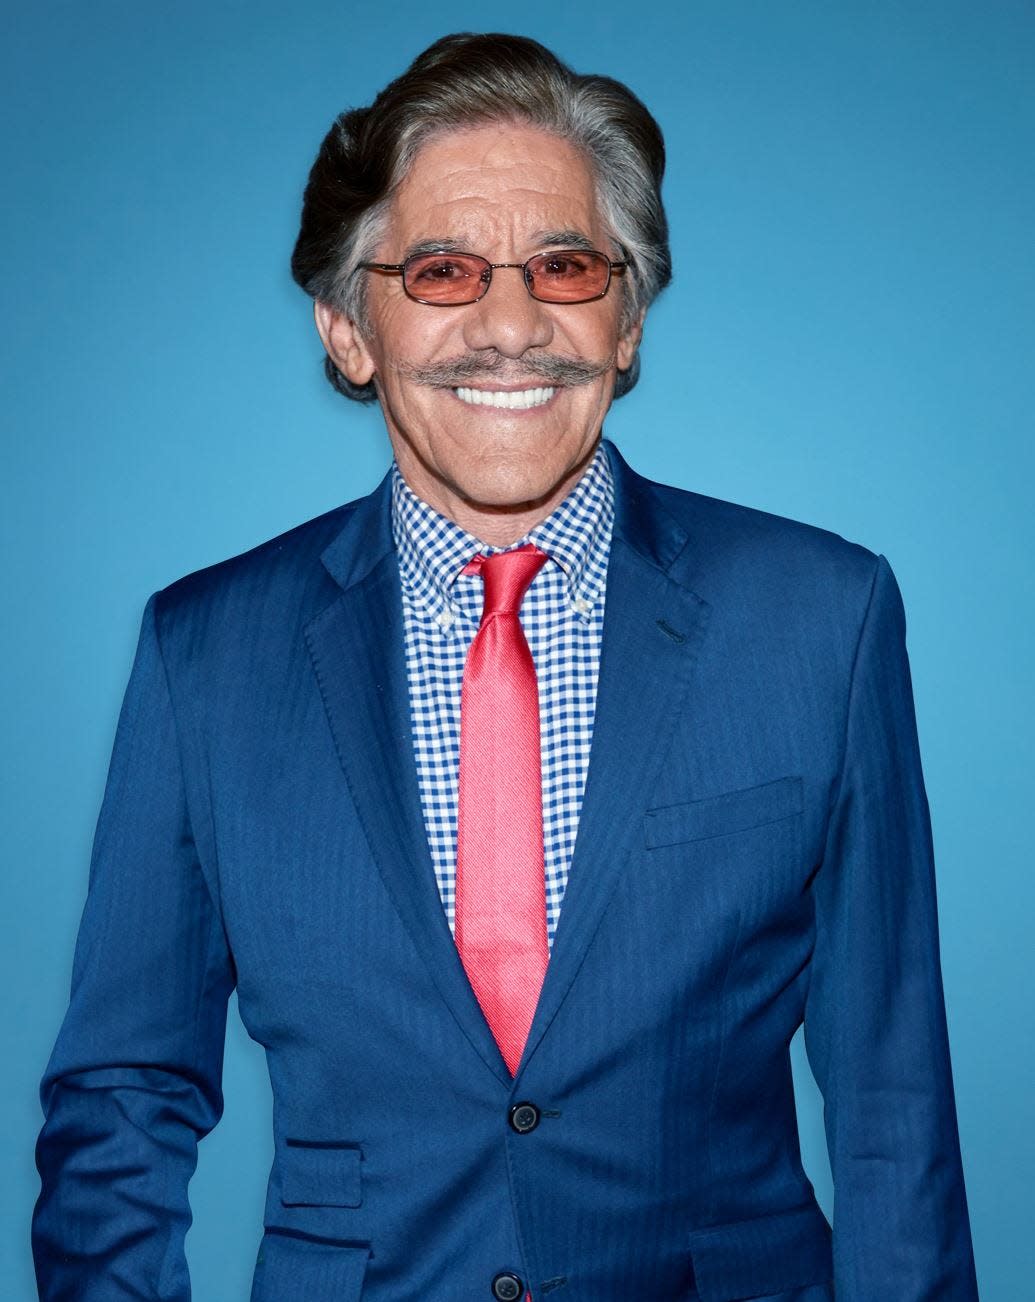 NewsNation announced Wednesday that former Fox News correspondent Geraldo Rivera would join the cable news network as a 